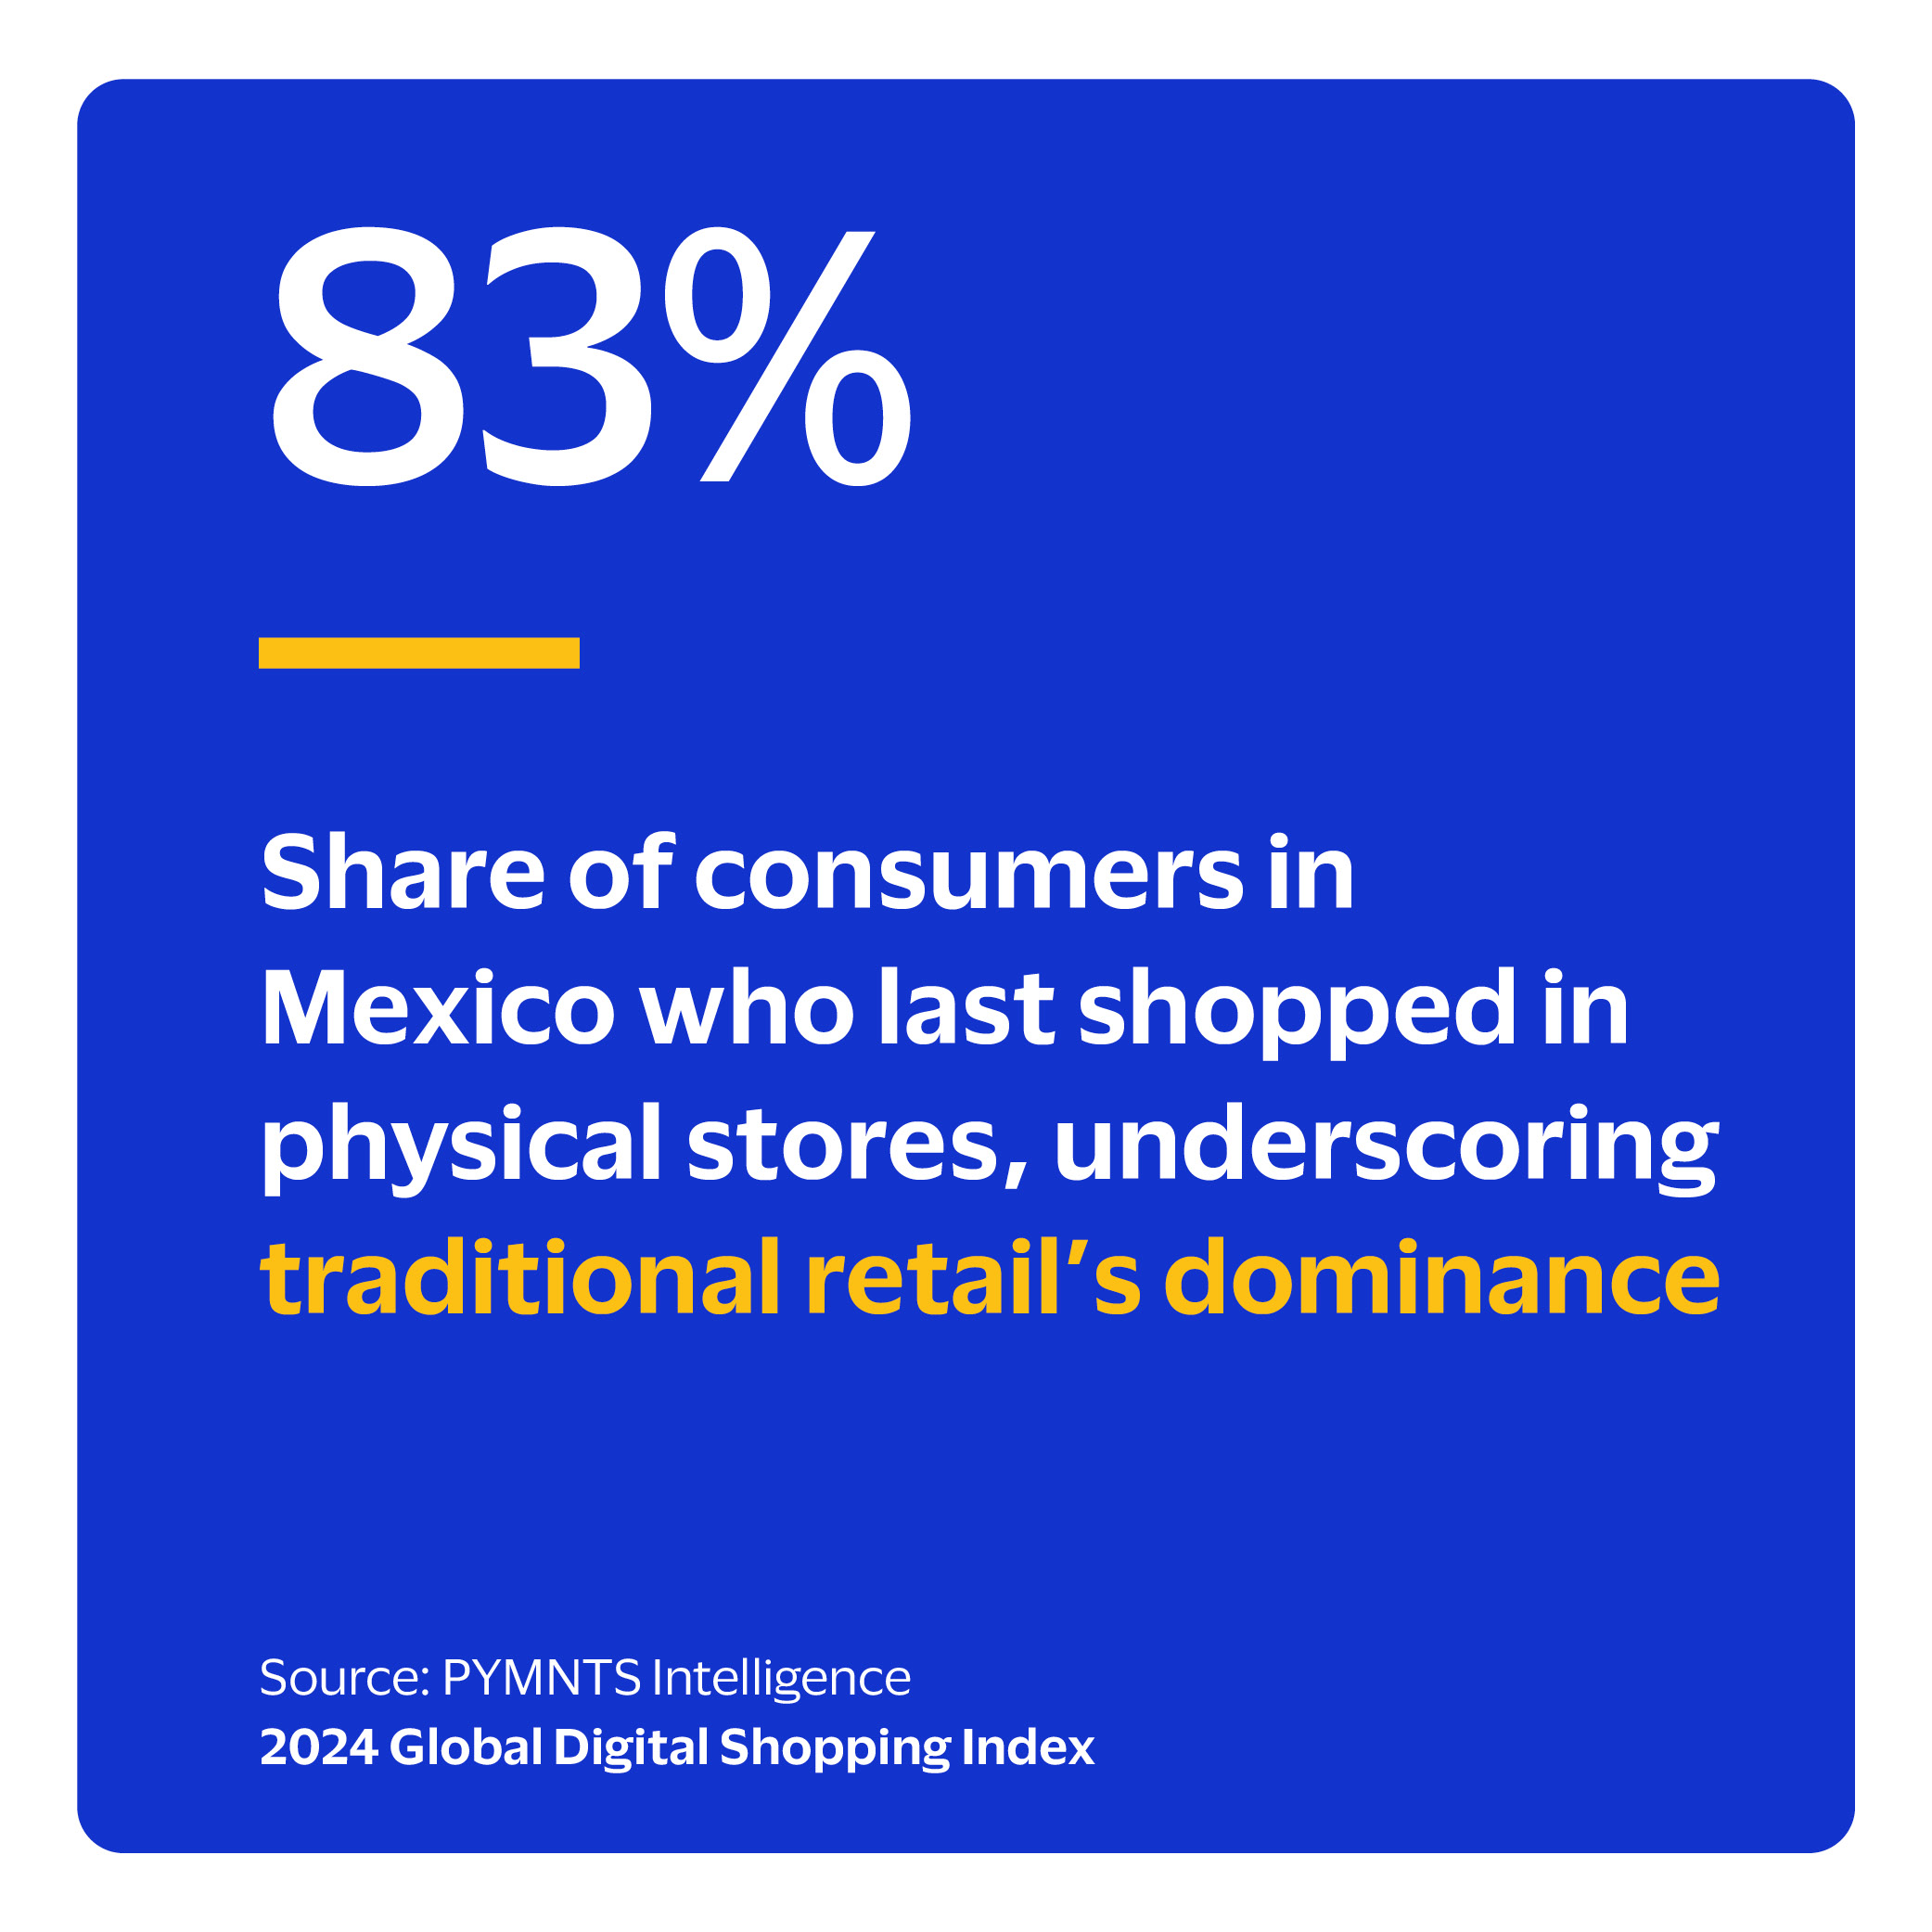 83%: Share of consumers in Mexico who last shopped in physical stores, underscoring traditional retail’s dominance